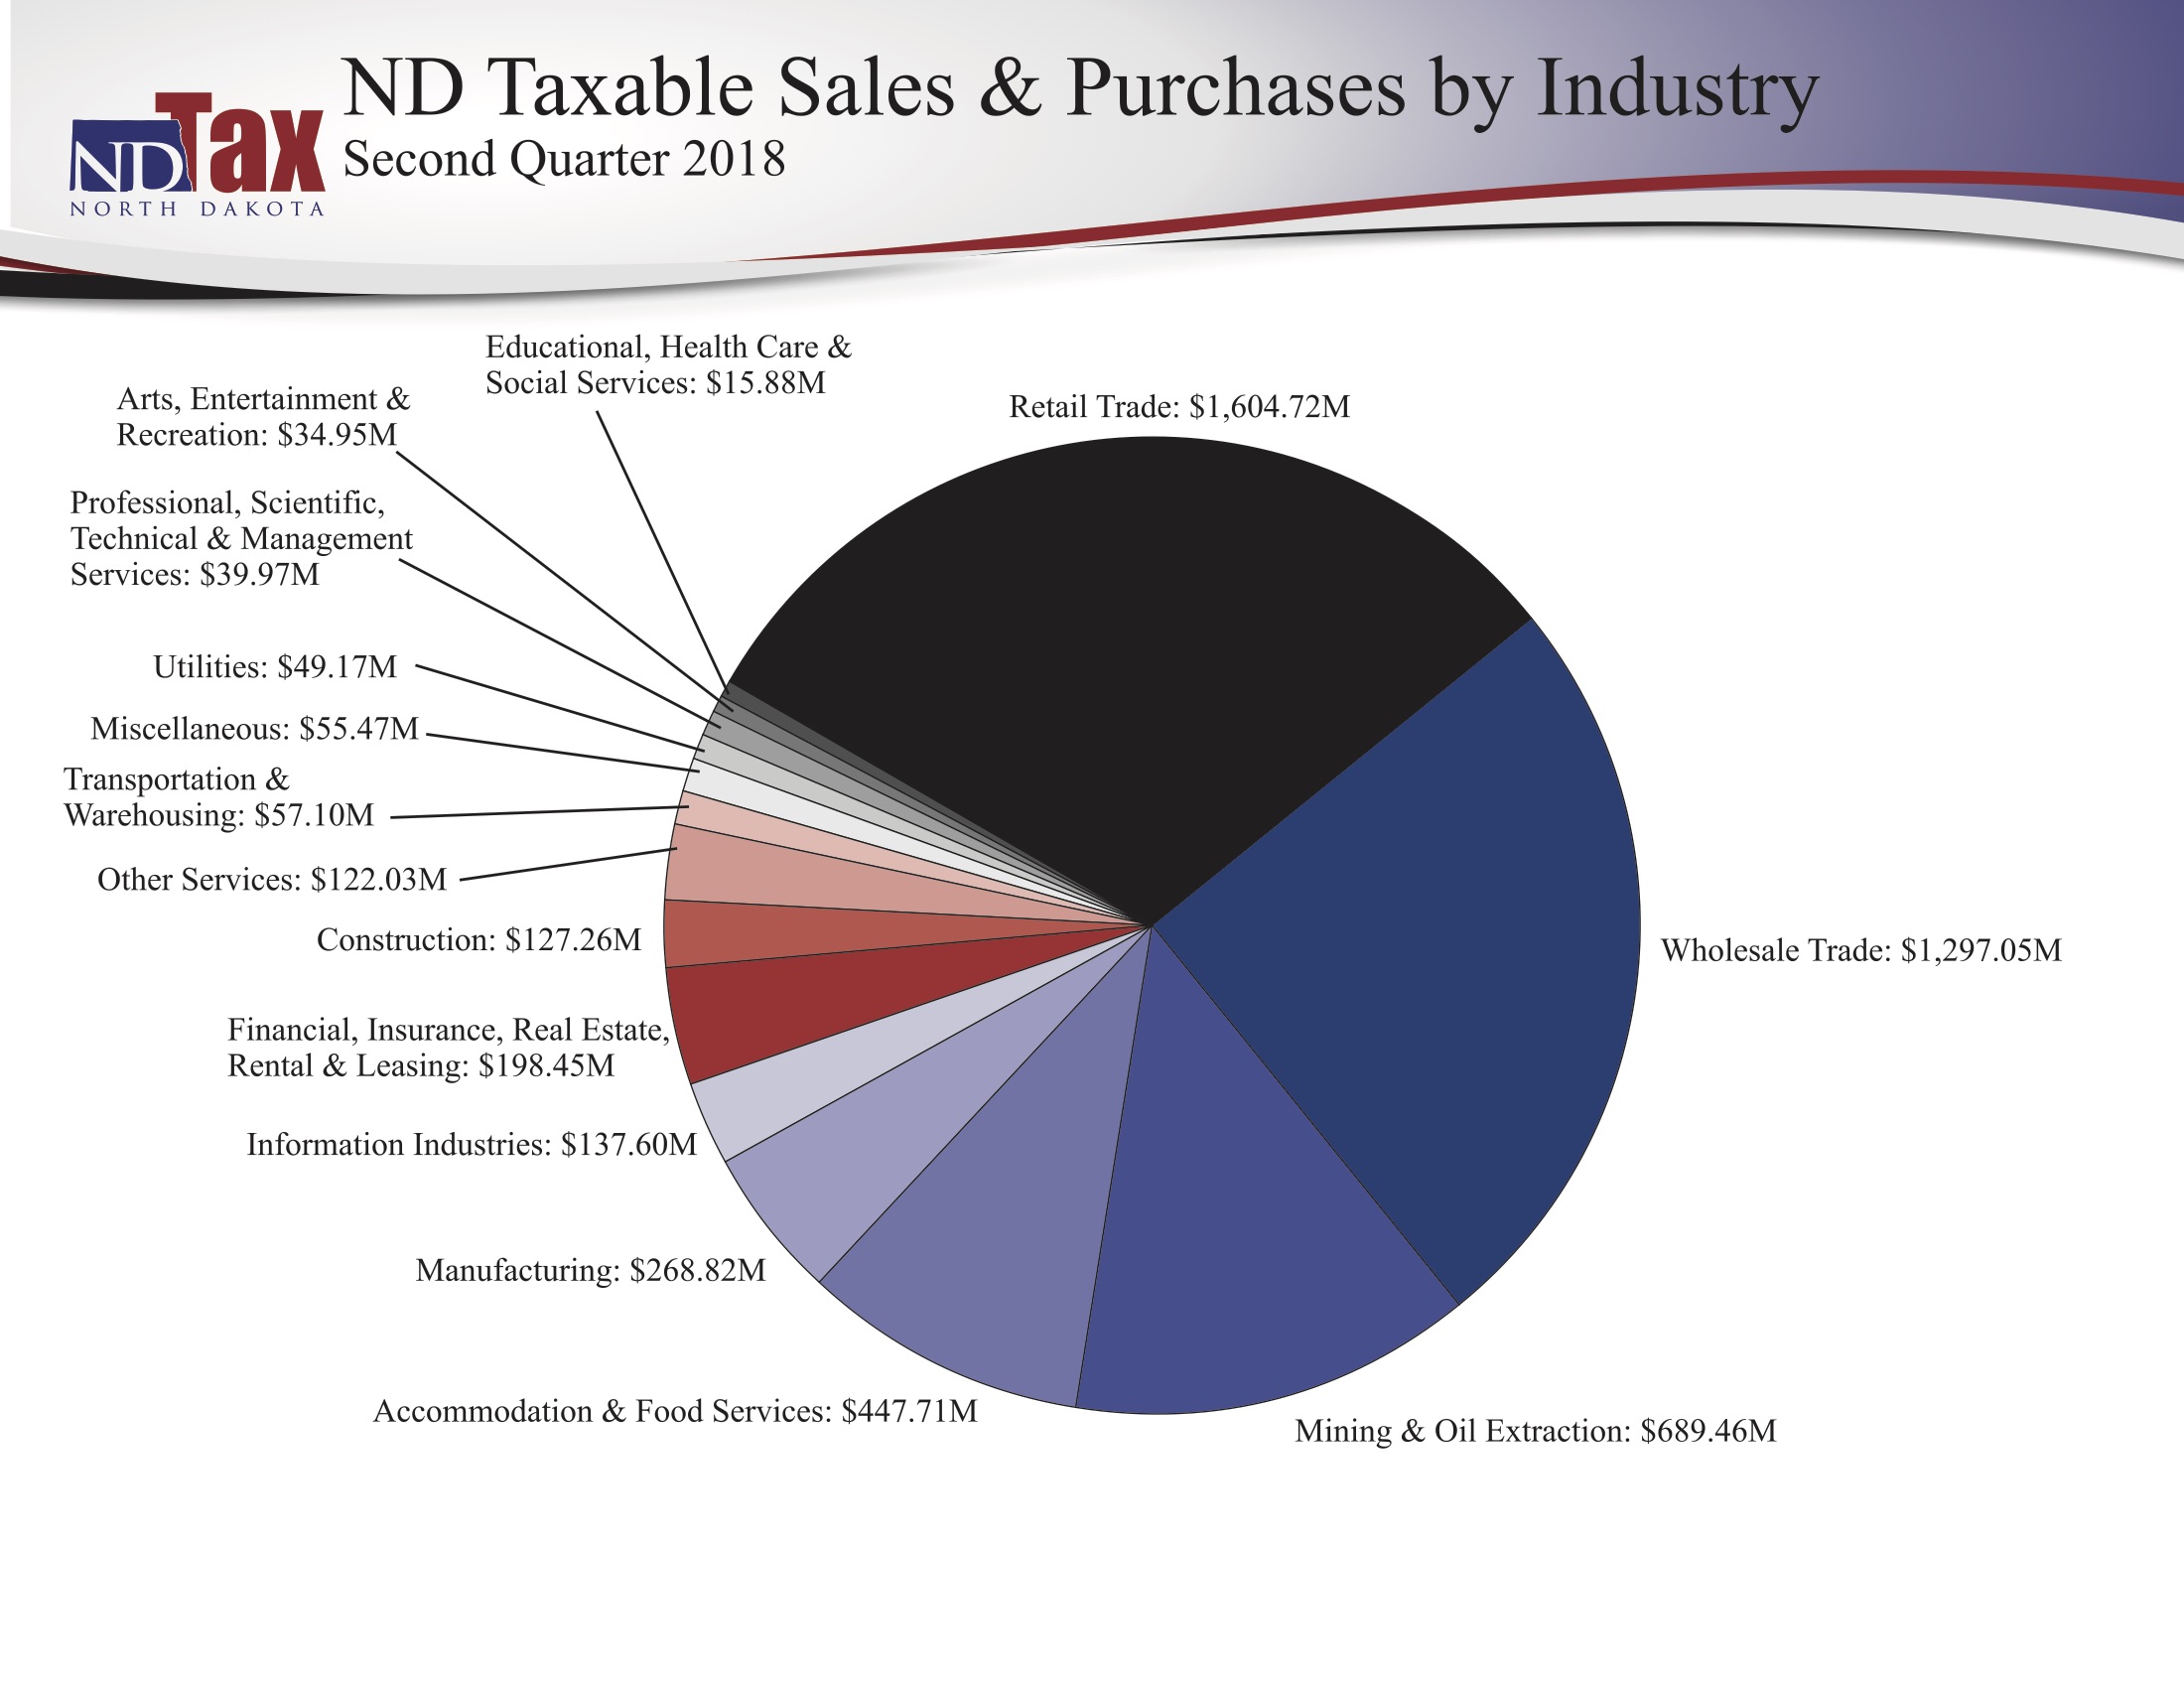 State taxable sales, Purchases up 10%